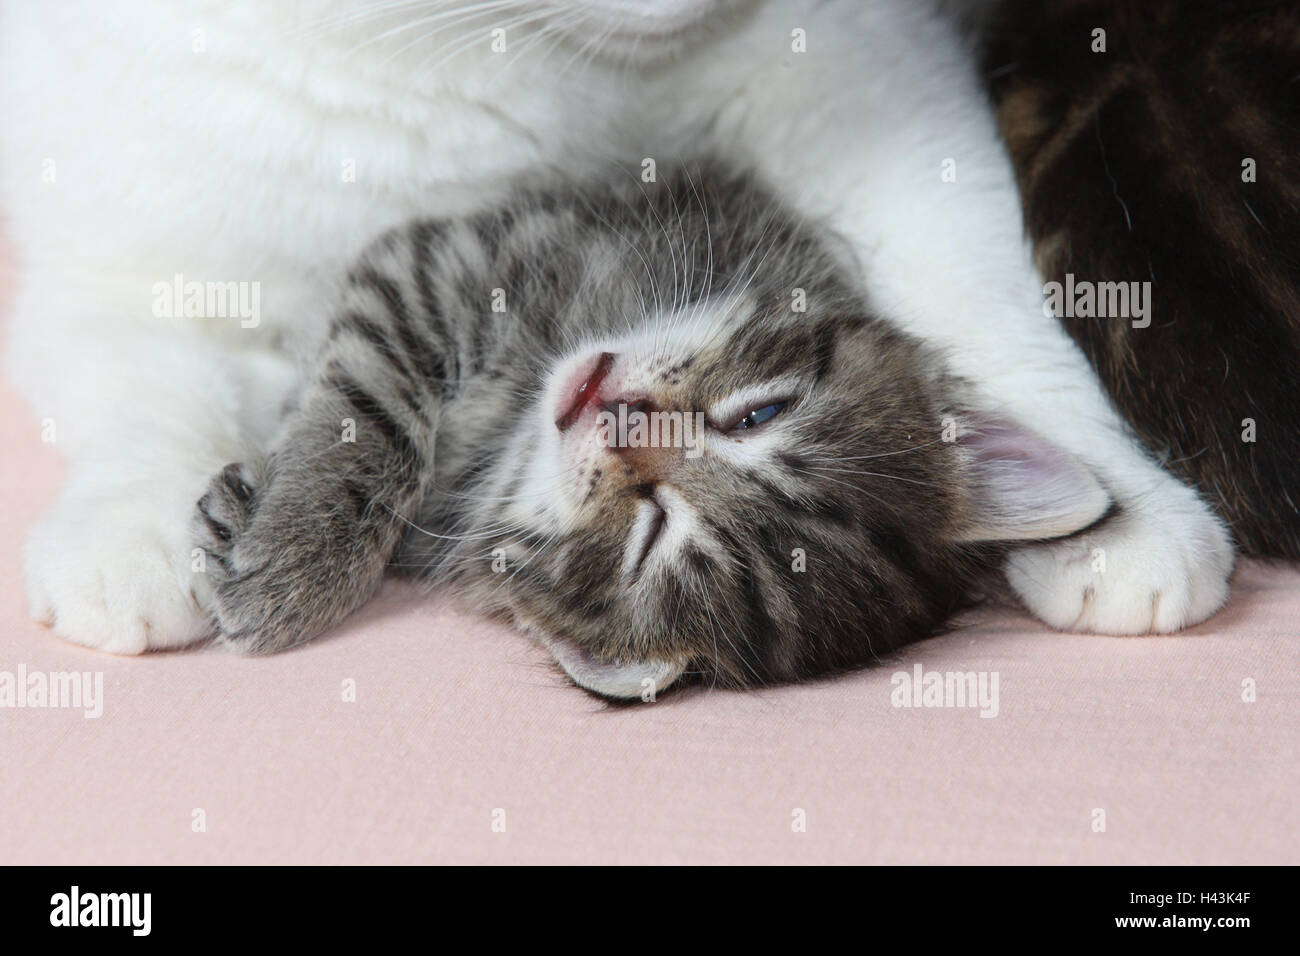 Cat's nut, lie, detail, front paws, kittens, doze, wink, portrait, bed, animals, mammals, pets, small cats, Felidae, white, striped, domesticates, cats, house cat, paws, mother animal, Kätzin, young animals, two, young, small, sweetly, love, care, suture, protection, trust, motherly love, cuddle, sleep, fatigue, young animals, animal babies, animal family, animal portrait, cat's portrait, inside, Stock Photo